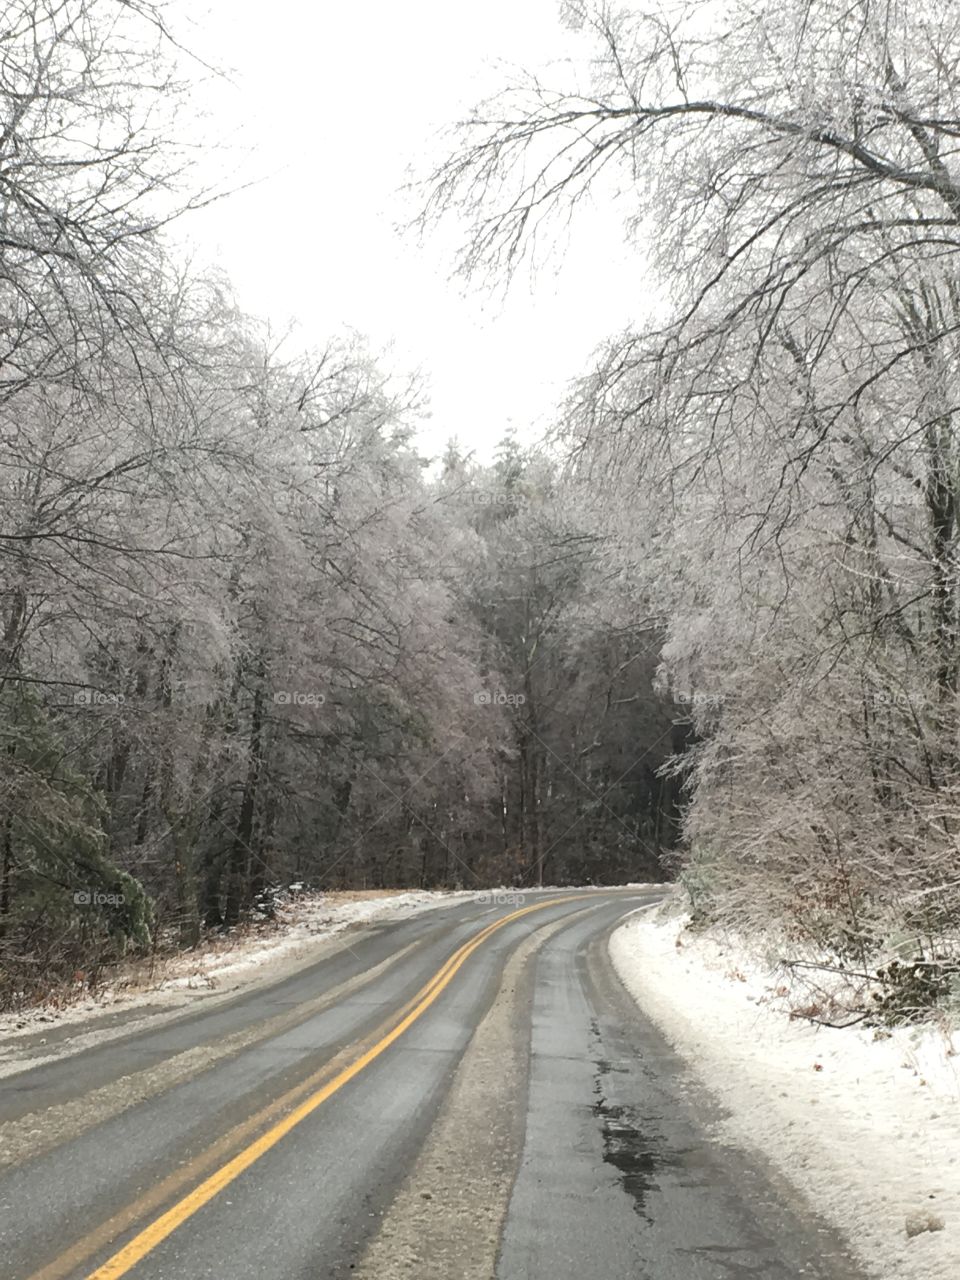 Northeast Winter Roads, Winding roads and icy trees. Something so Beautiful can be so deceiving.